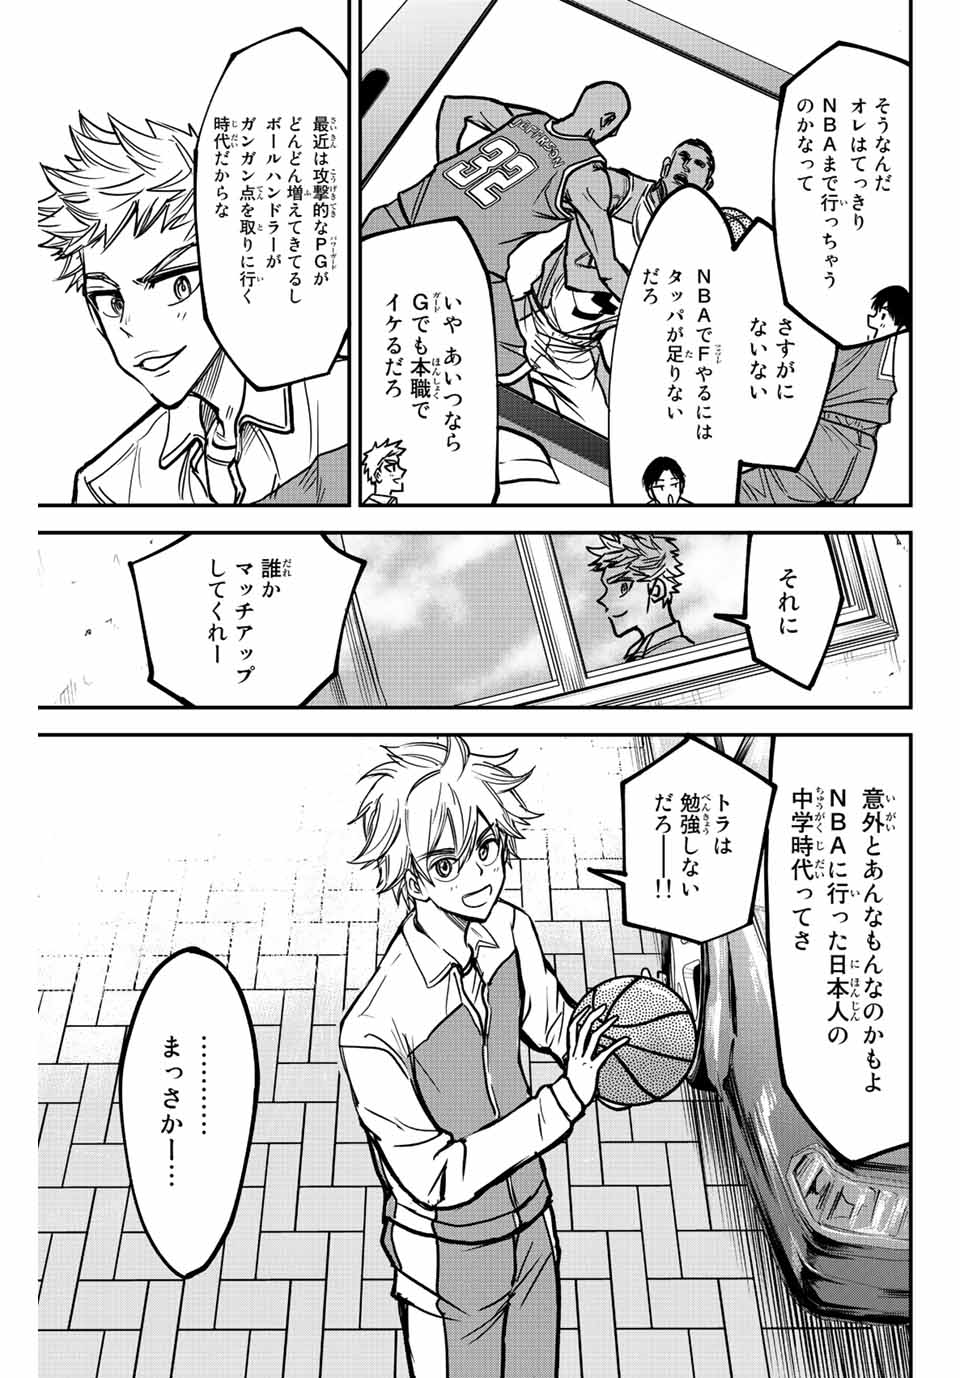 B＆ALIVE 第1.1話 - Page 11